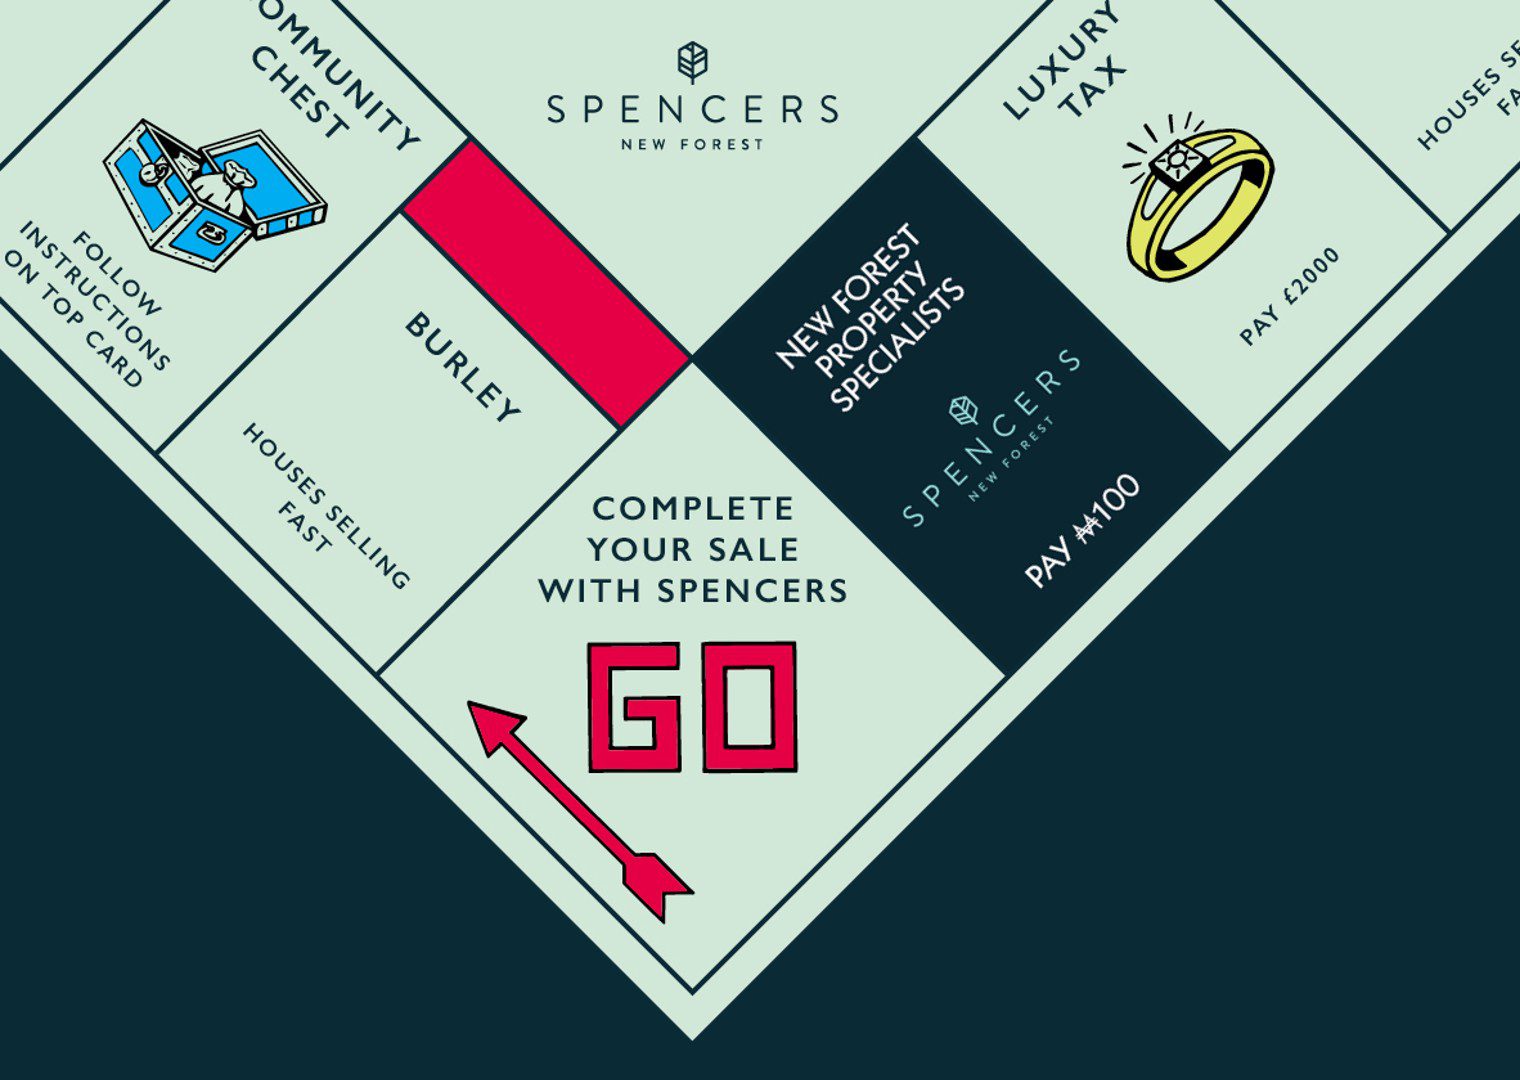 New Forest Monopoly ‘BIG REVEAL’ Features Spencers!